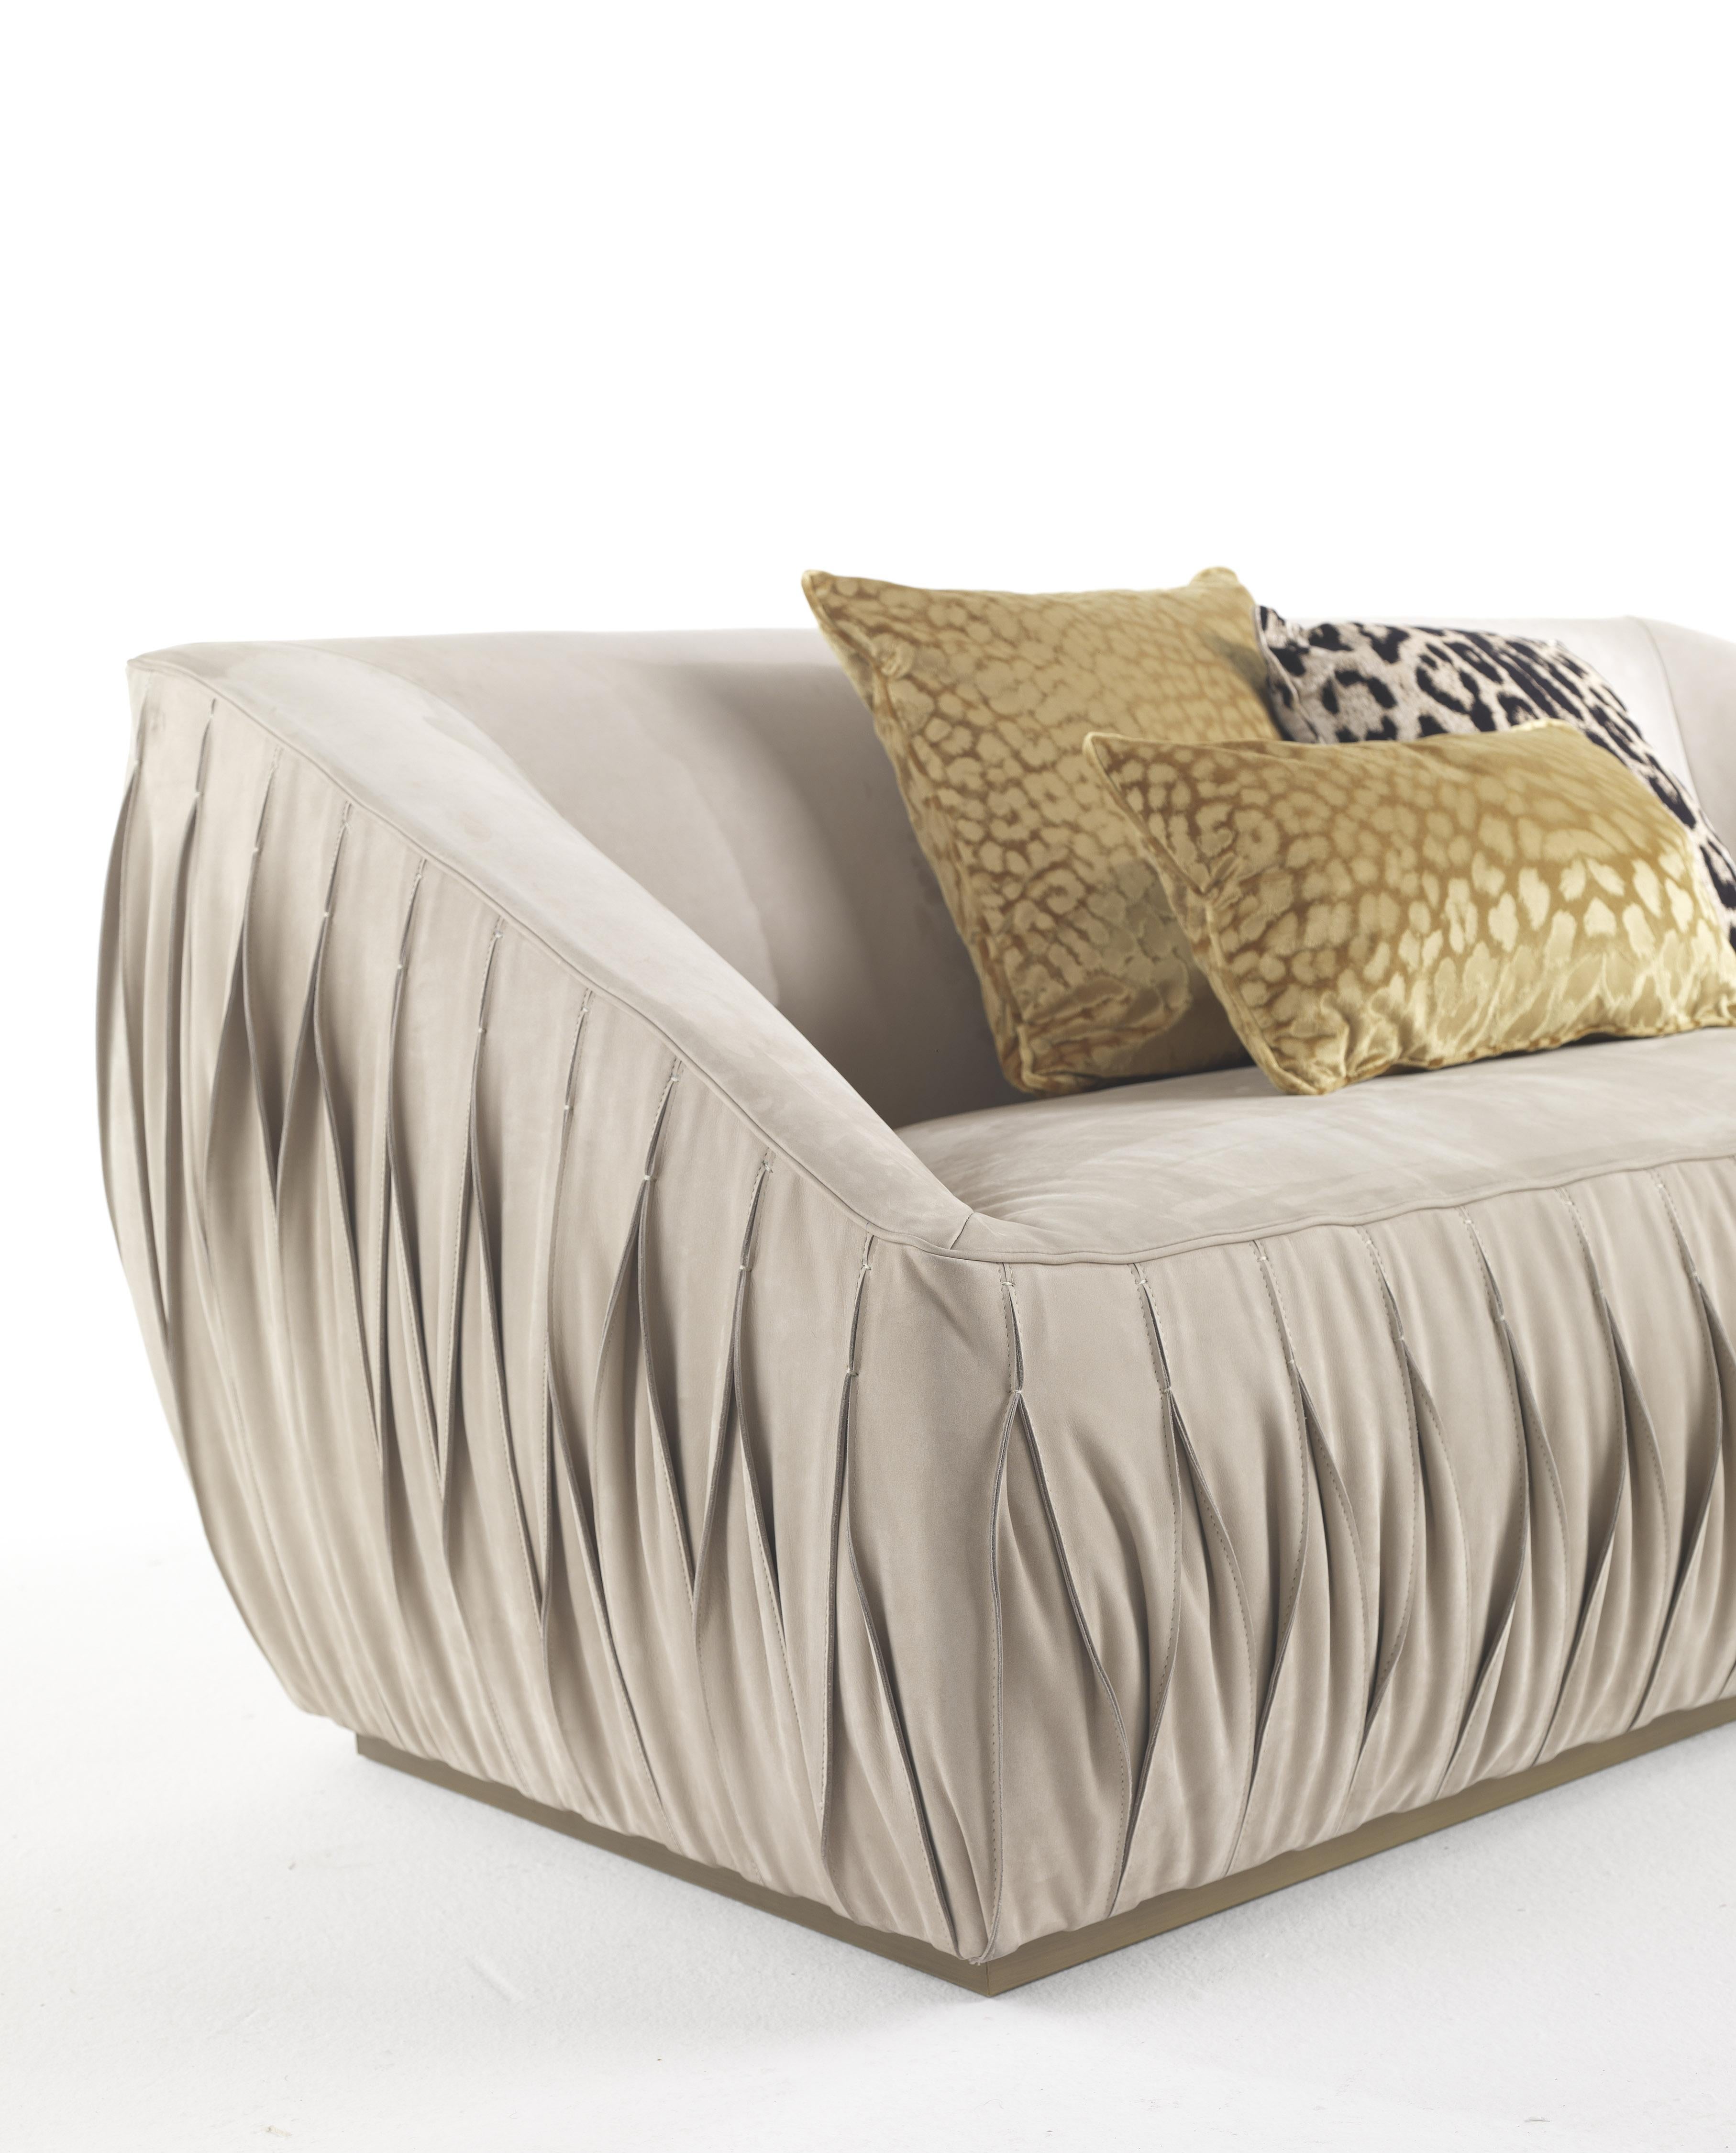 Modern 21st Century Nest 2-Seater Sofa in Leather by Roberto Cavalli Home Interiors For Sale